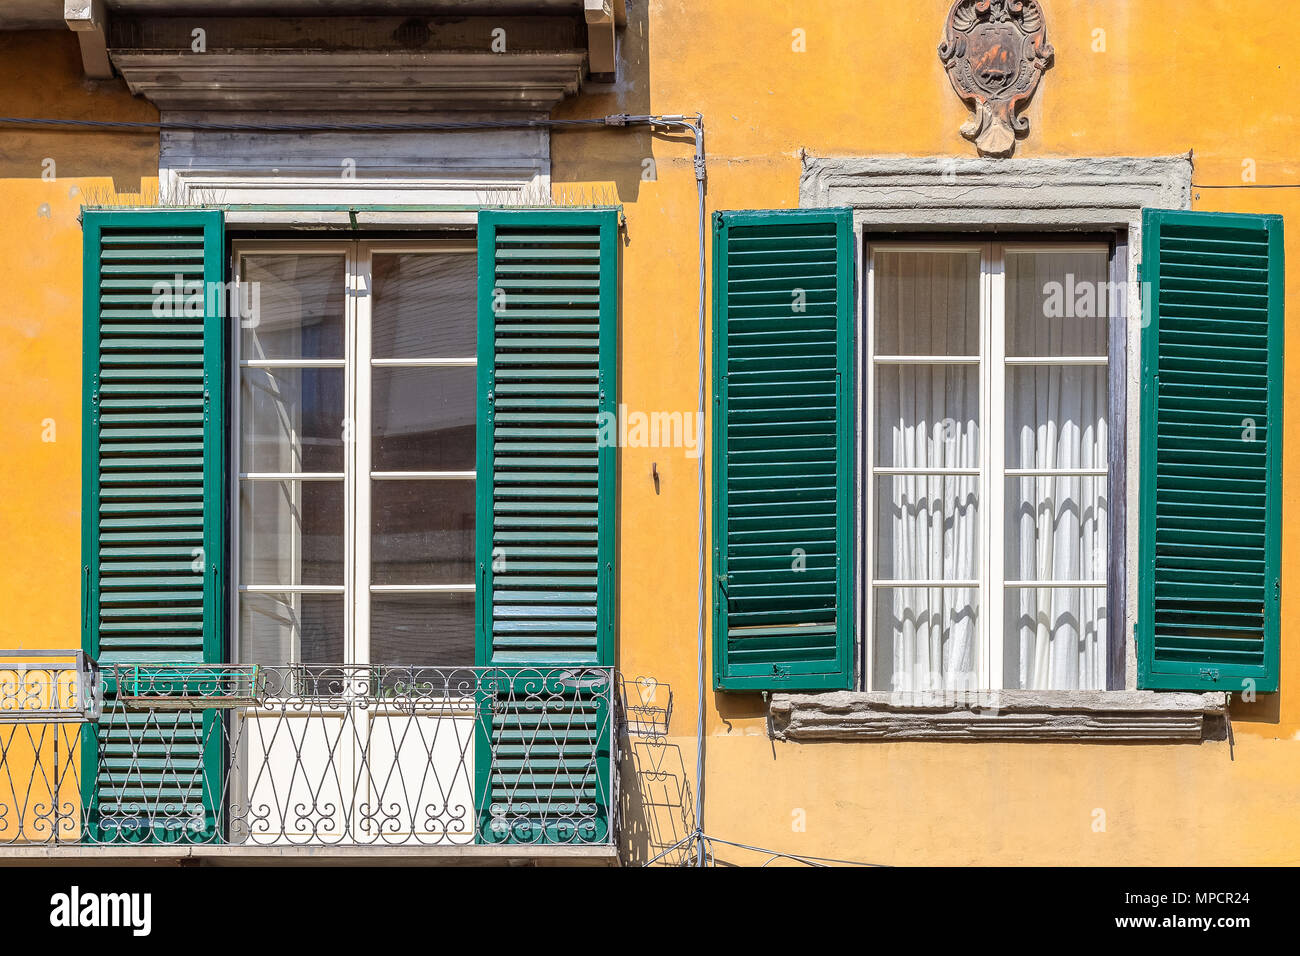 Exterior of traditional Italian buildings with green shutters in Pisa, Italy Stock Photo